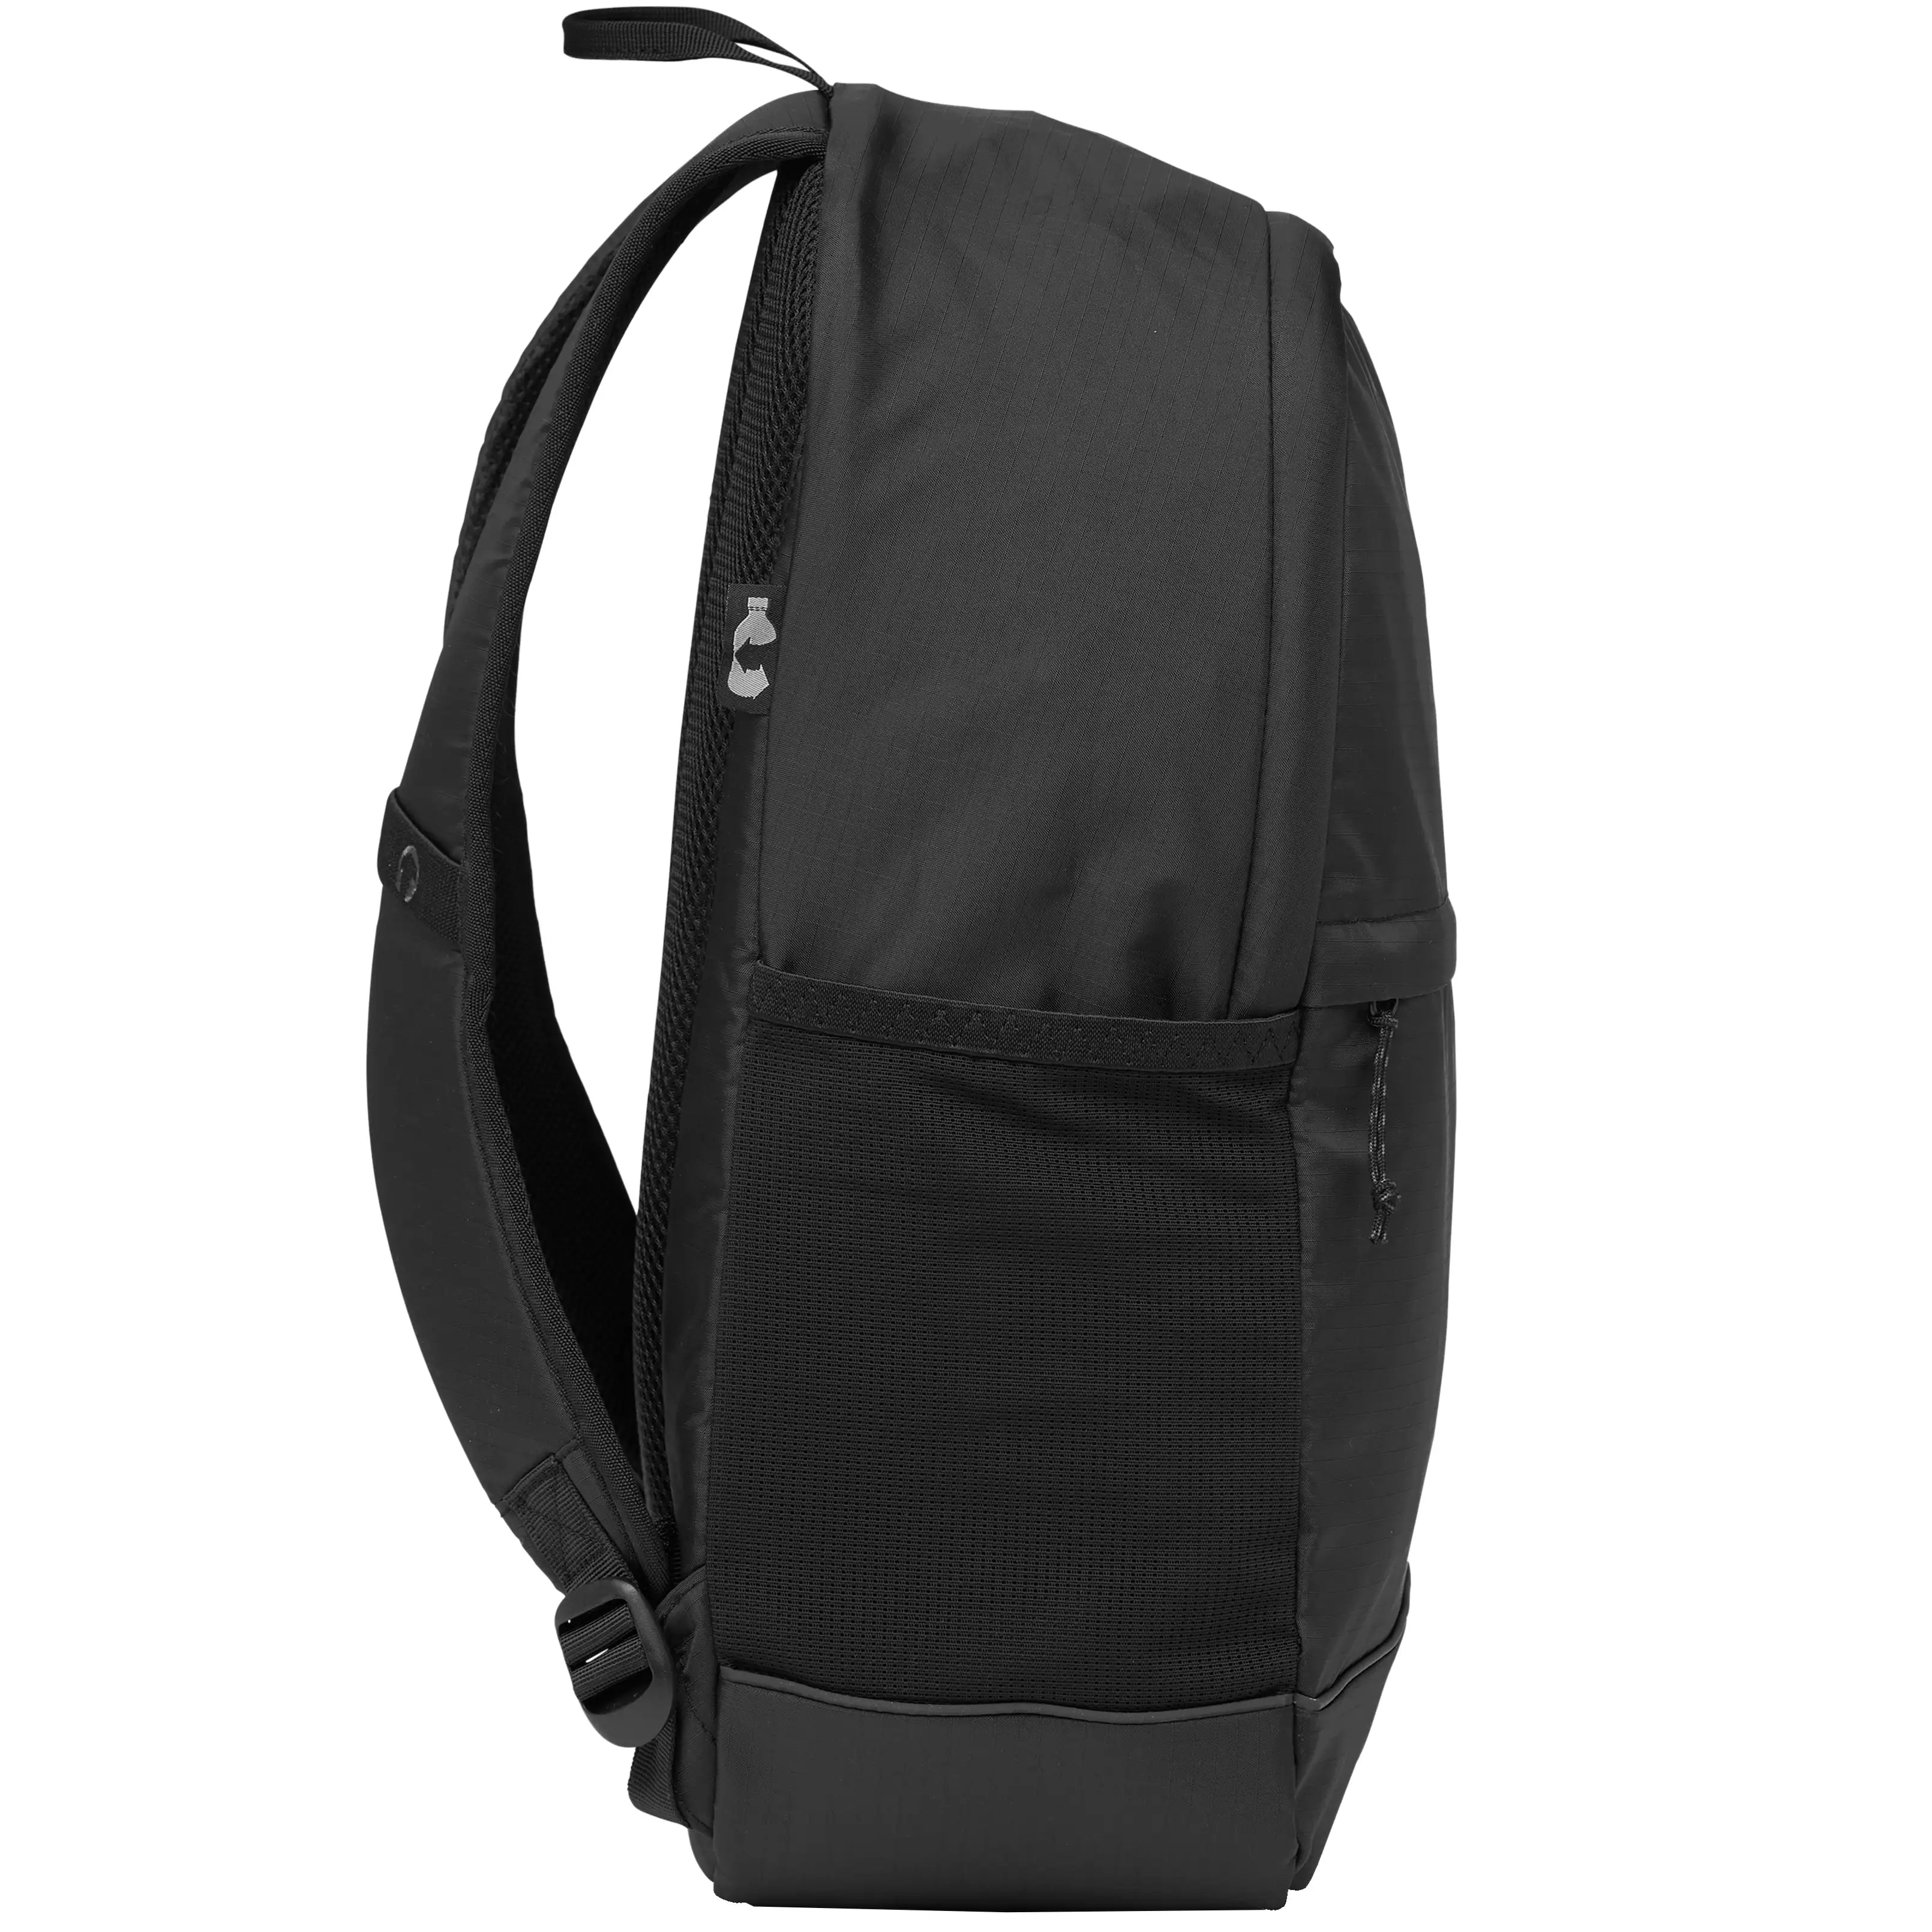 Satch Fly leisure backpack 45 cm - Ripstop Black